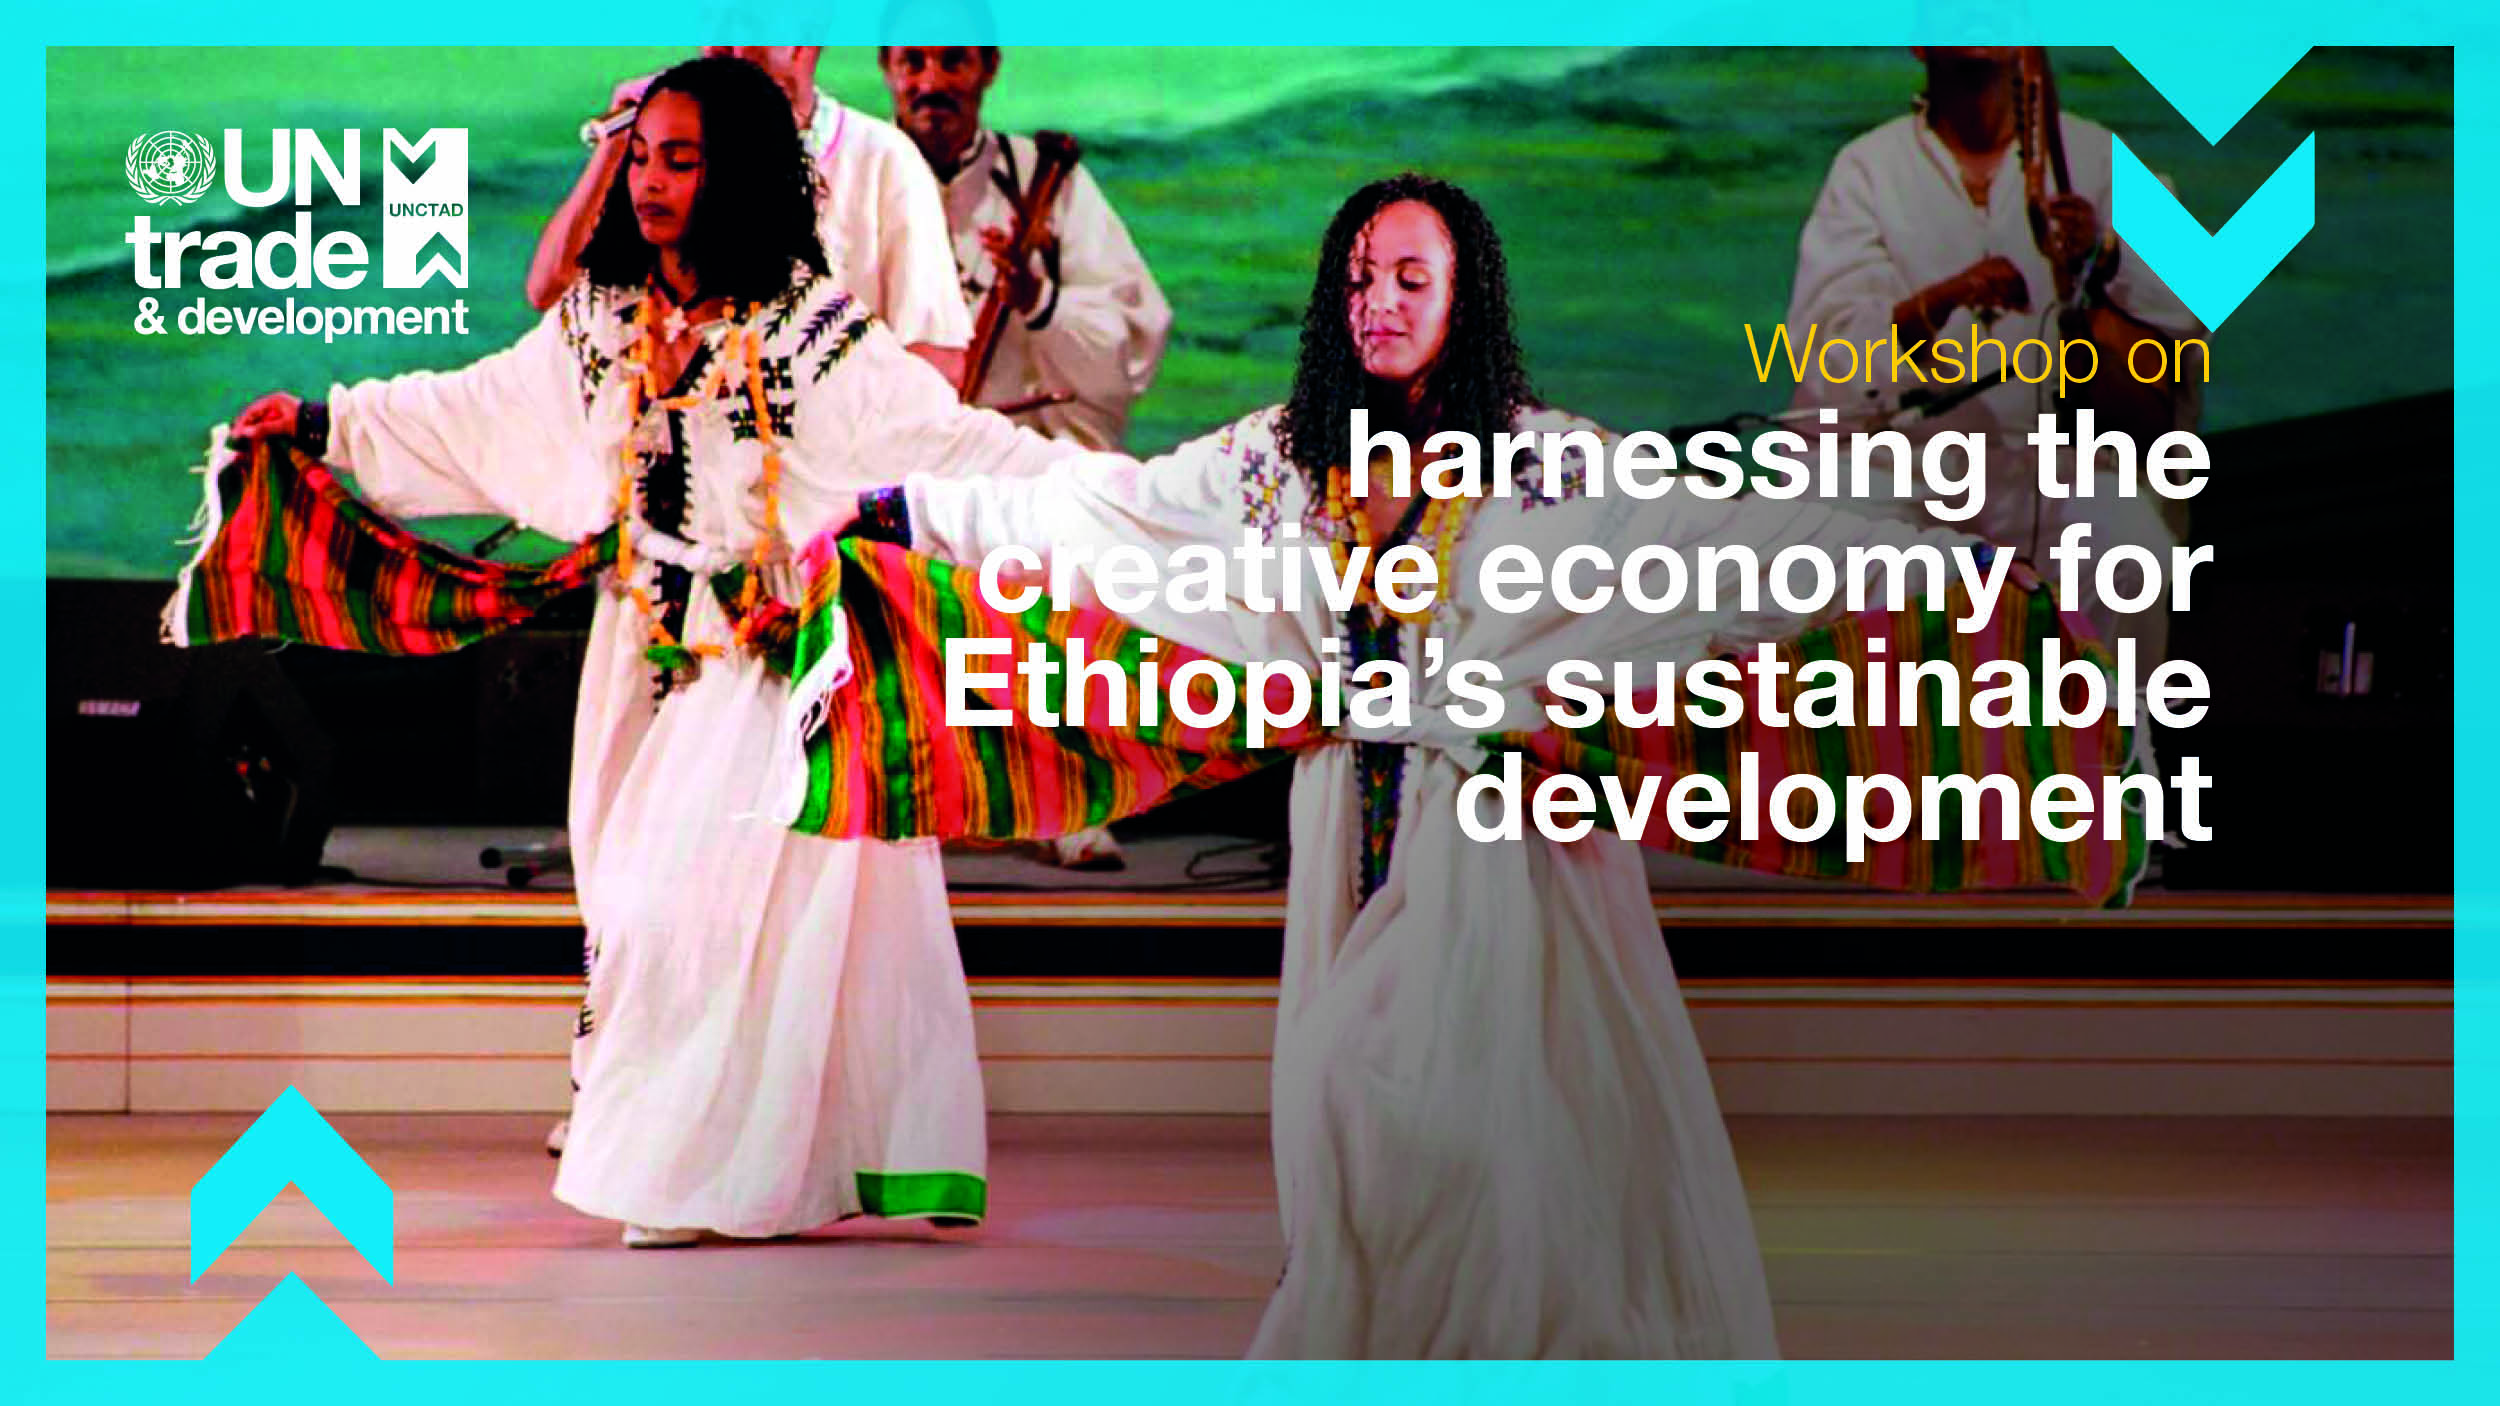 Workshop on harnessing the creative economy for Ethiopia's sustainable development